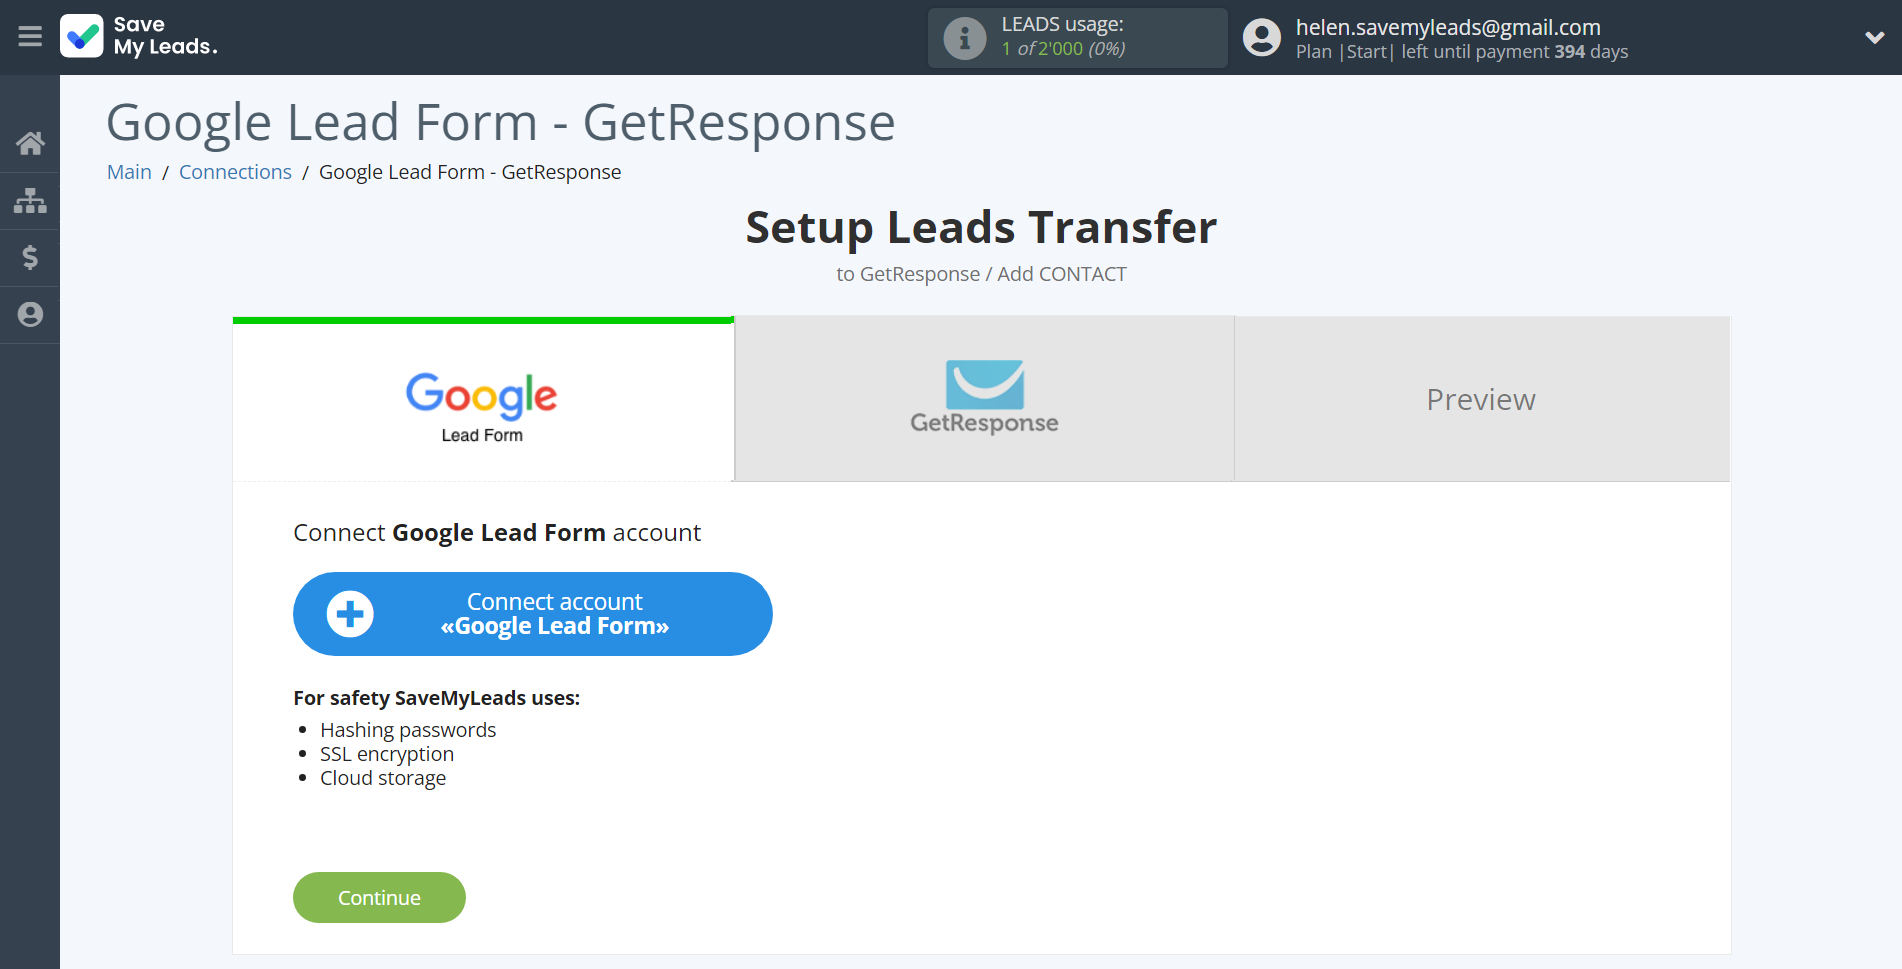 How to Connect Google Lead Form with GetResponse | Data Source account